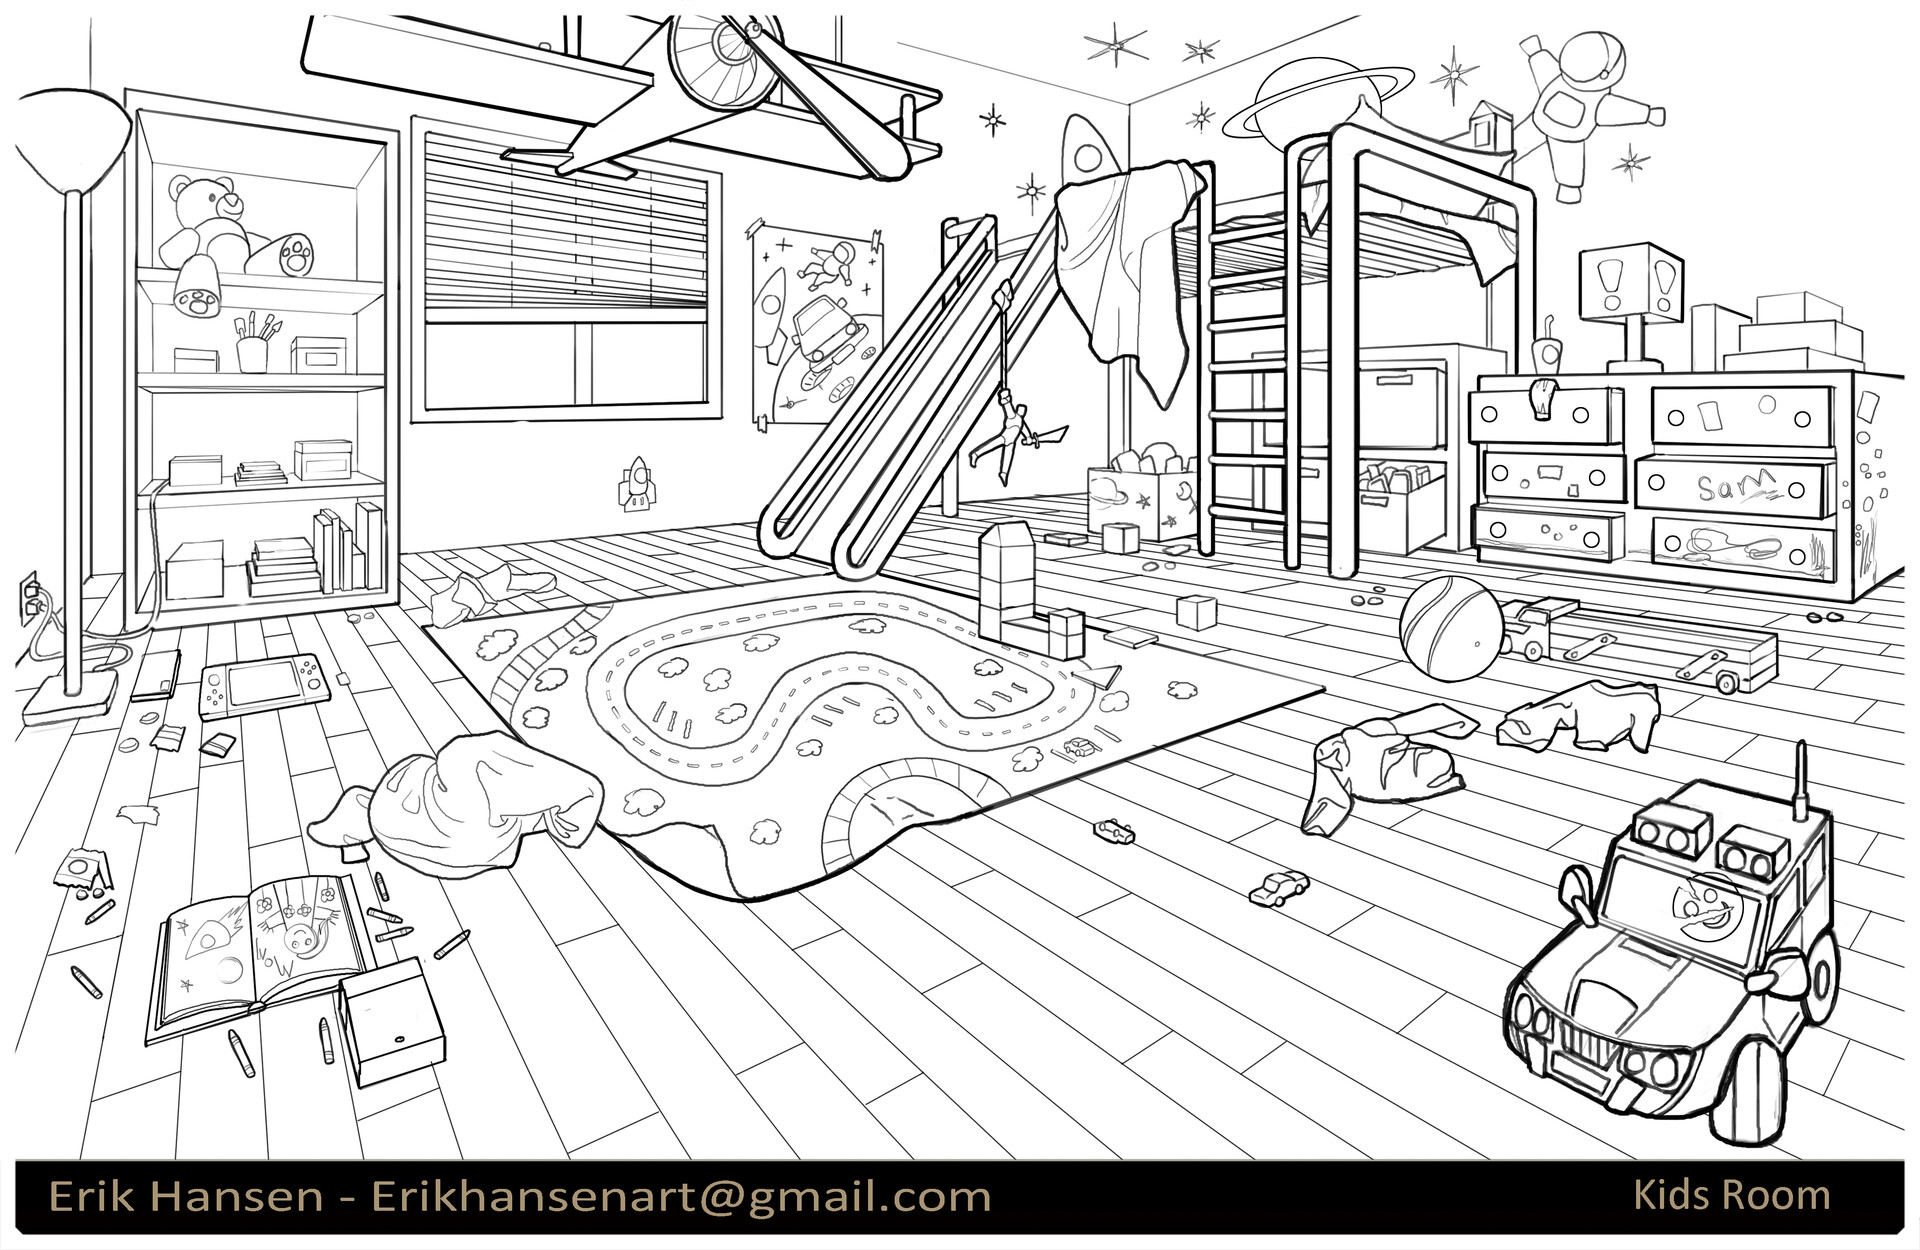 Kids room sketch in black and white Interior outline of a room for children  with furniture  CanStock